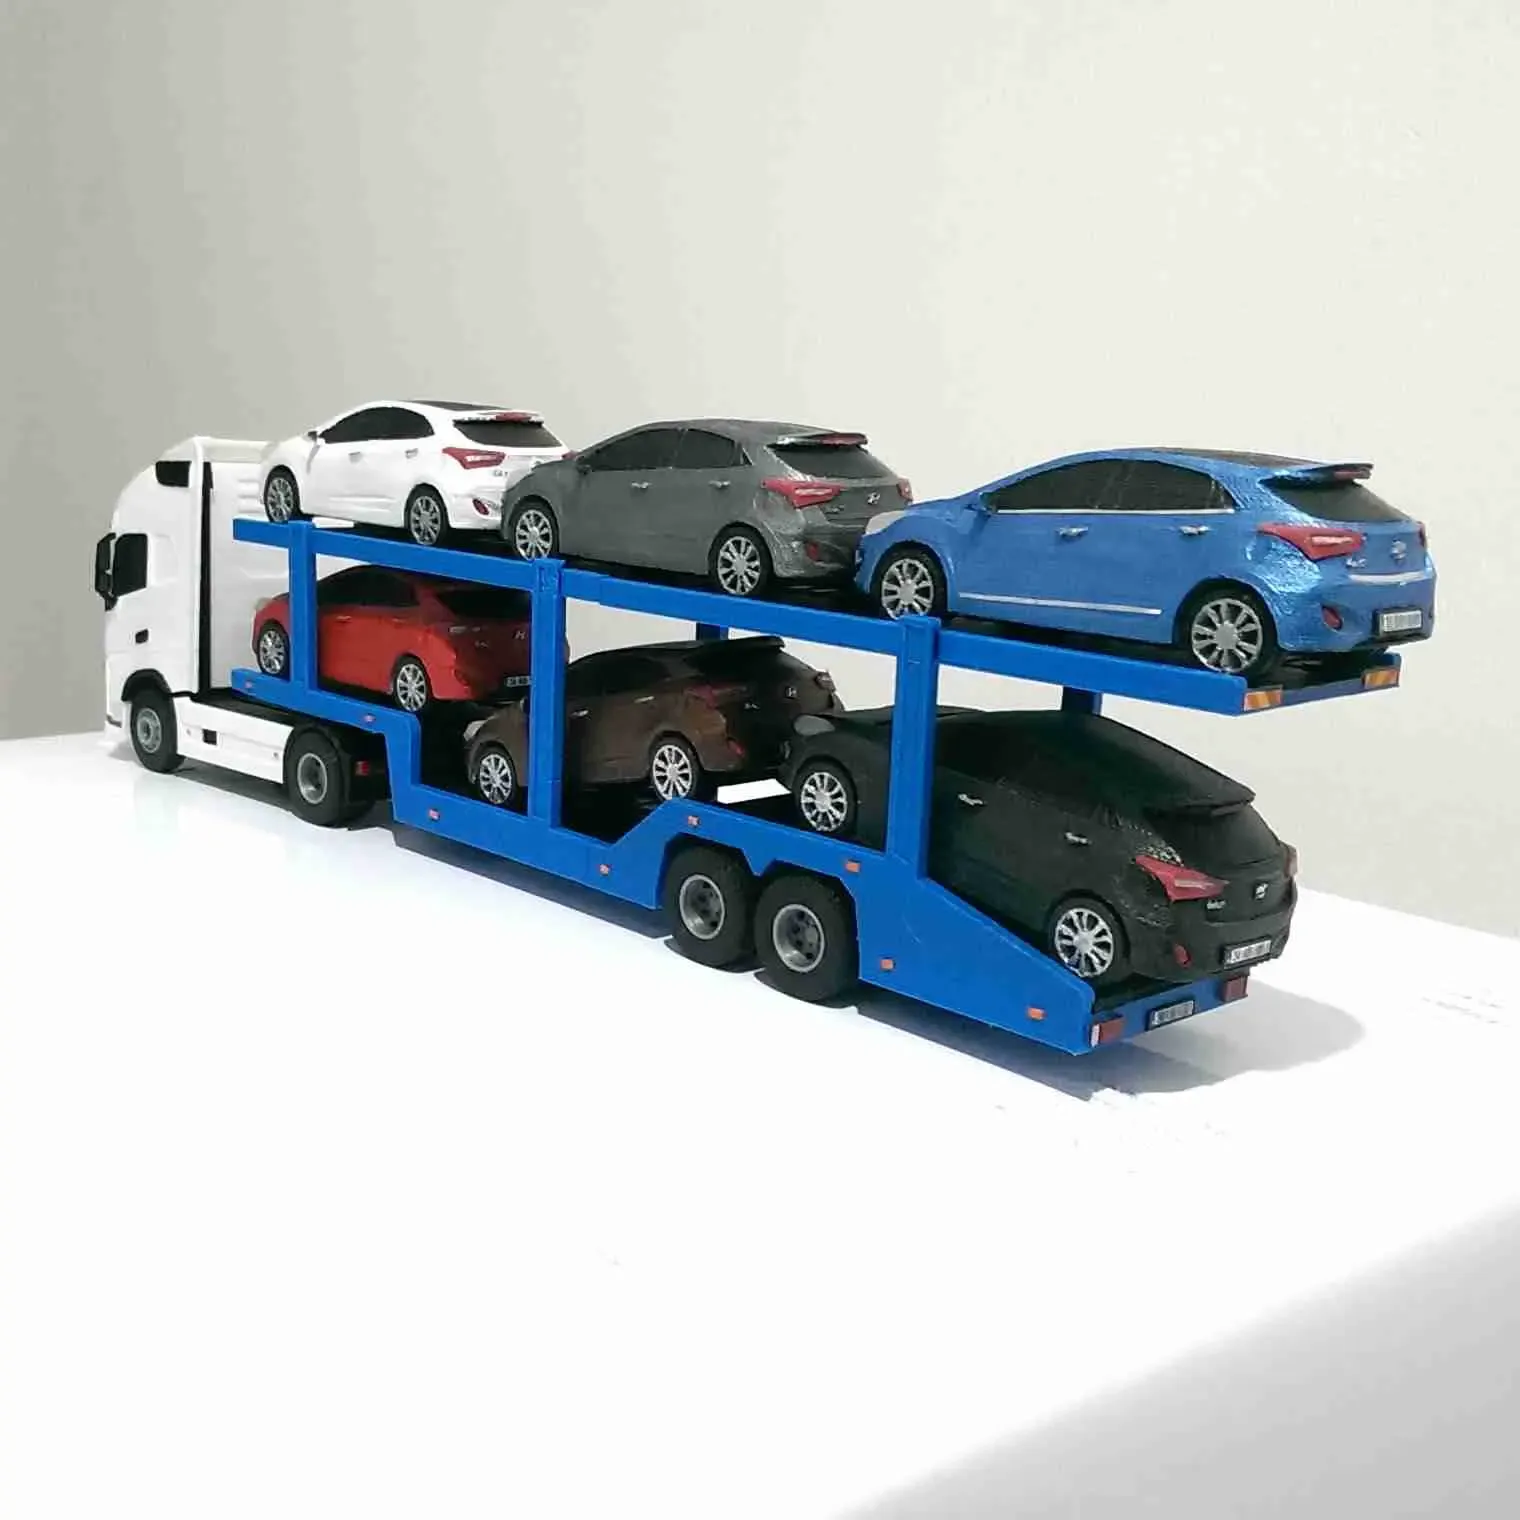 VOLVO TRUCK AND CAR TRANSPORT TRAILER